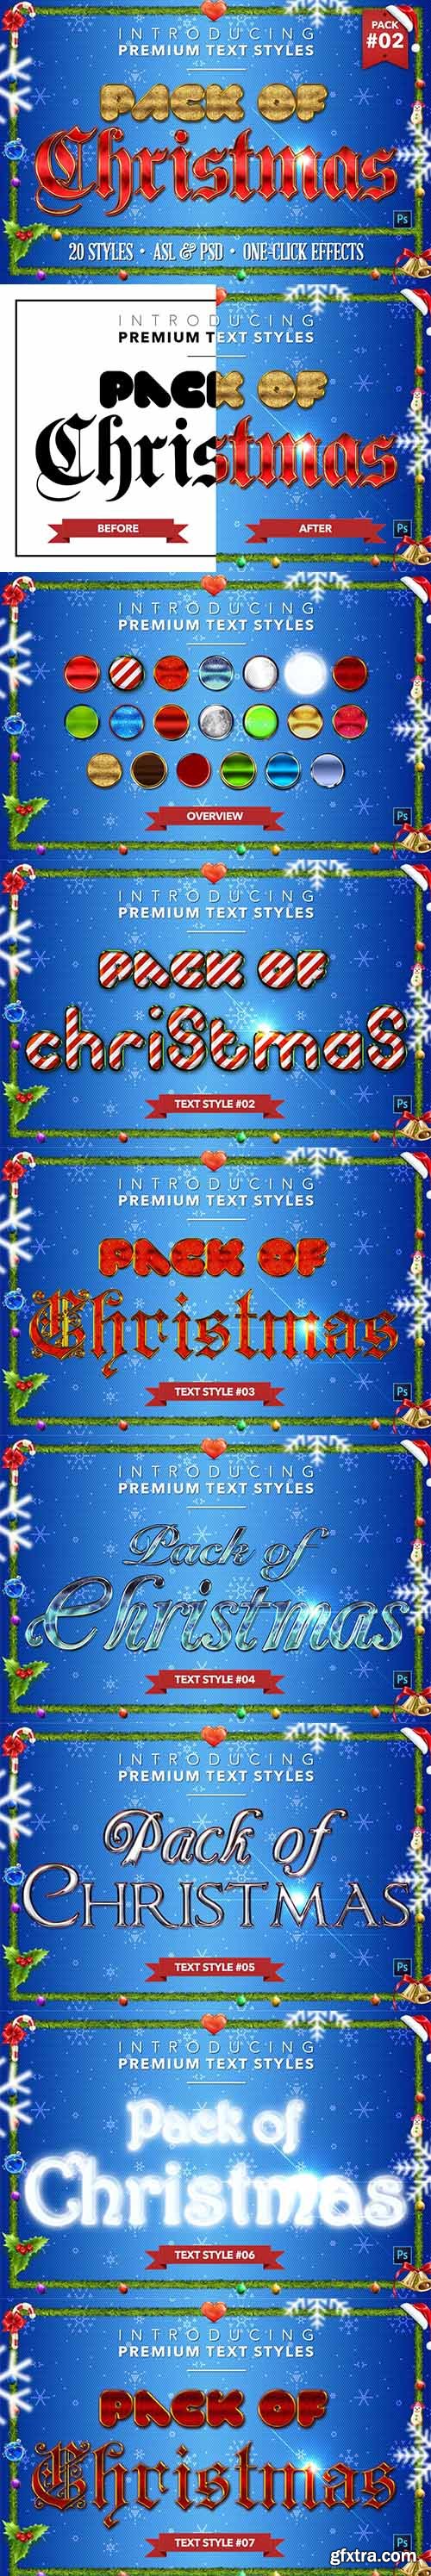 CreativeMarket - Christmas Pack #2 - Text Styles 4378071